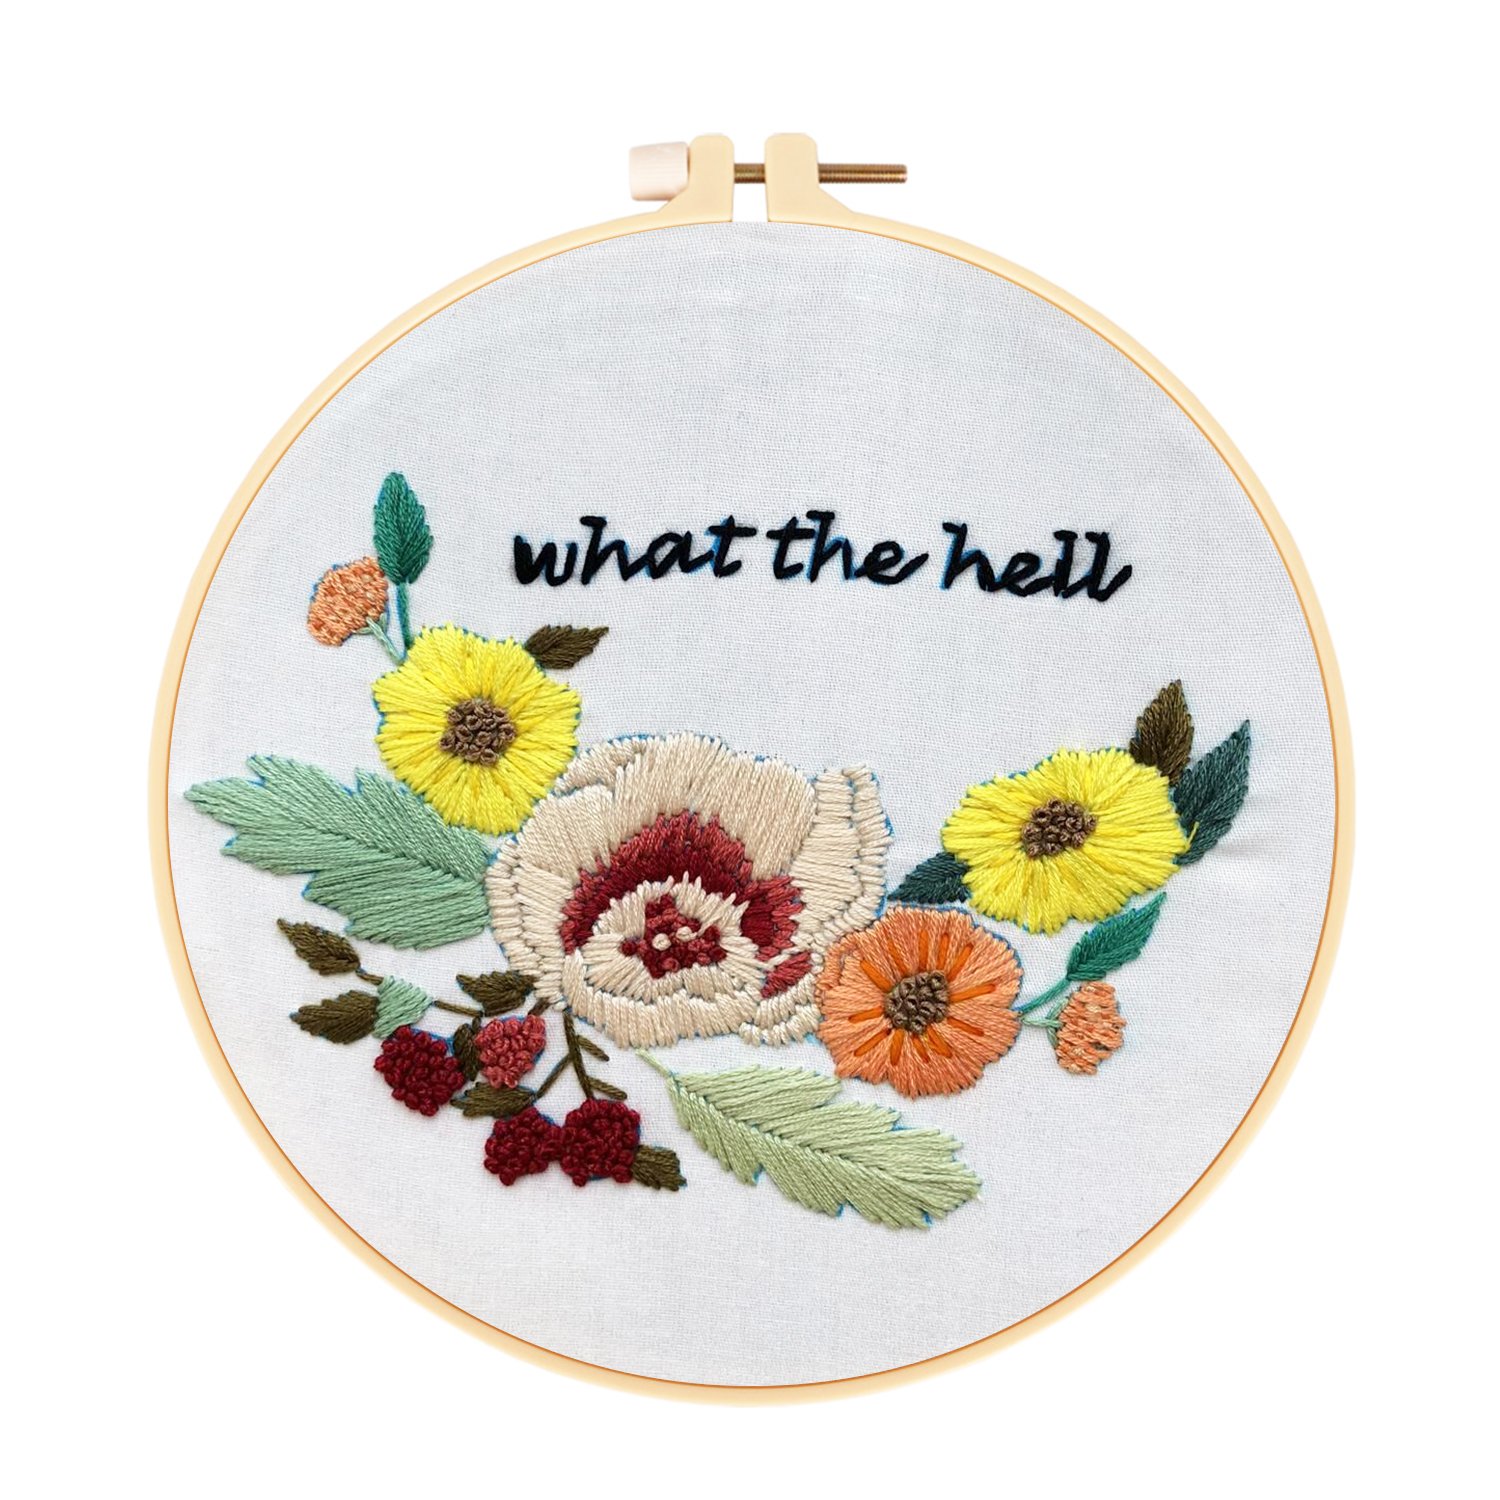 DIY Handmade Embroidery Cross stitch kit for Adult Beginner - Wreath with Funny Text Pattern